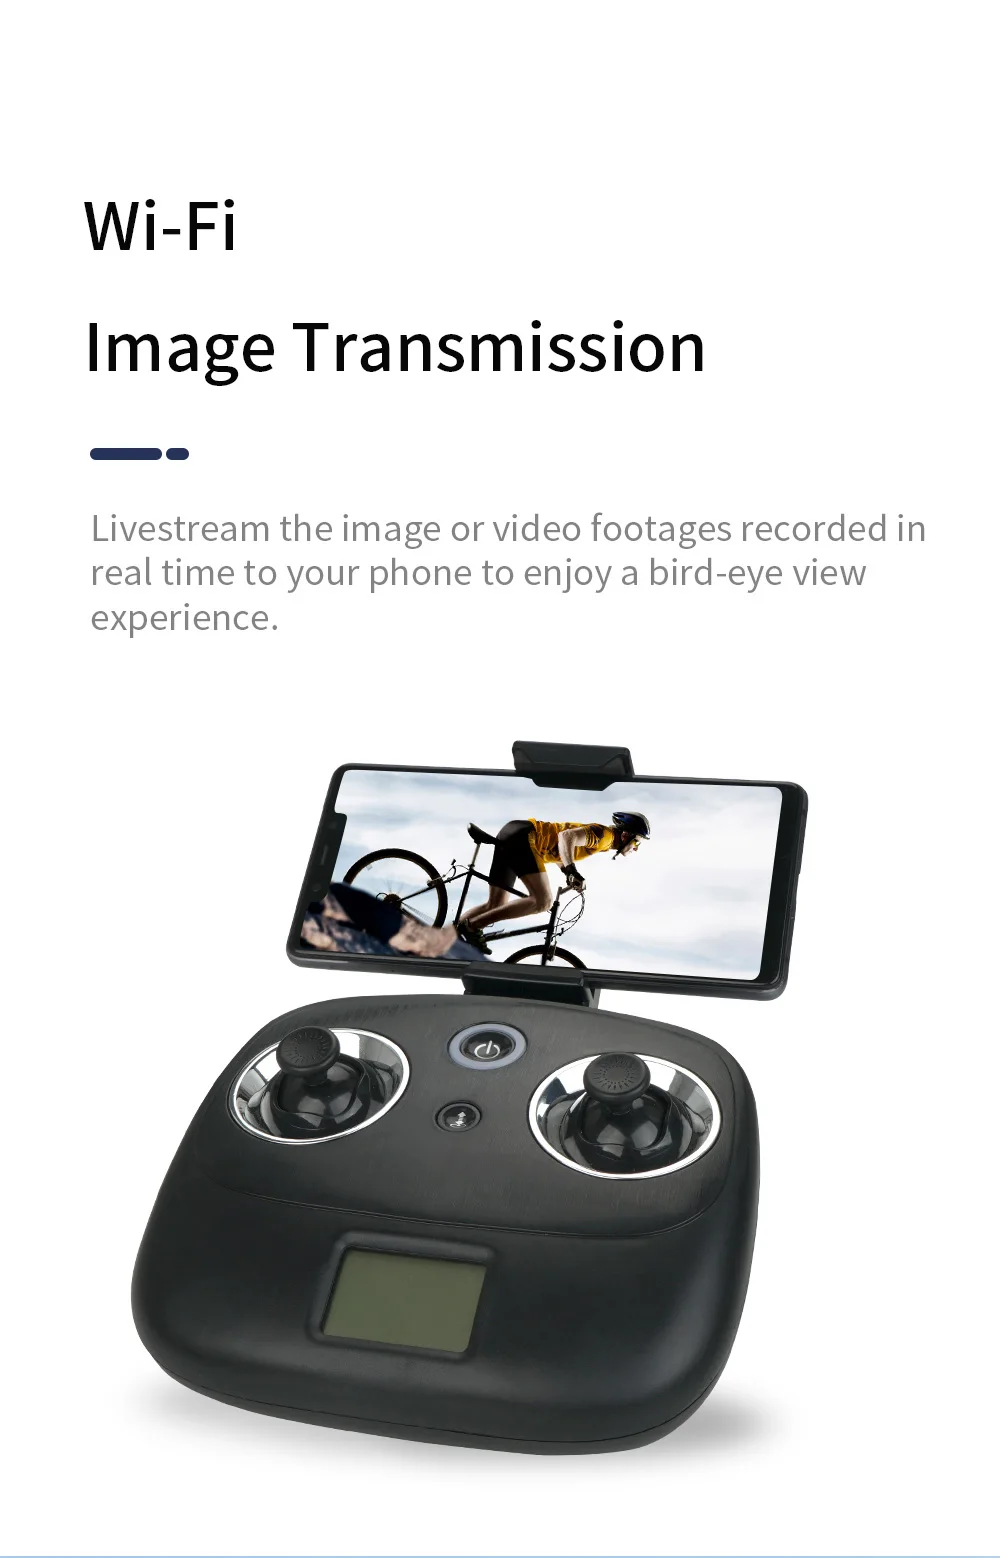 JJRC H86 Drone, wi-fi image transmission livestream the image or video footages